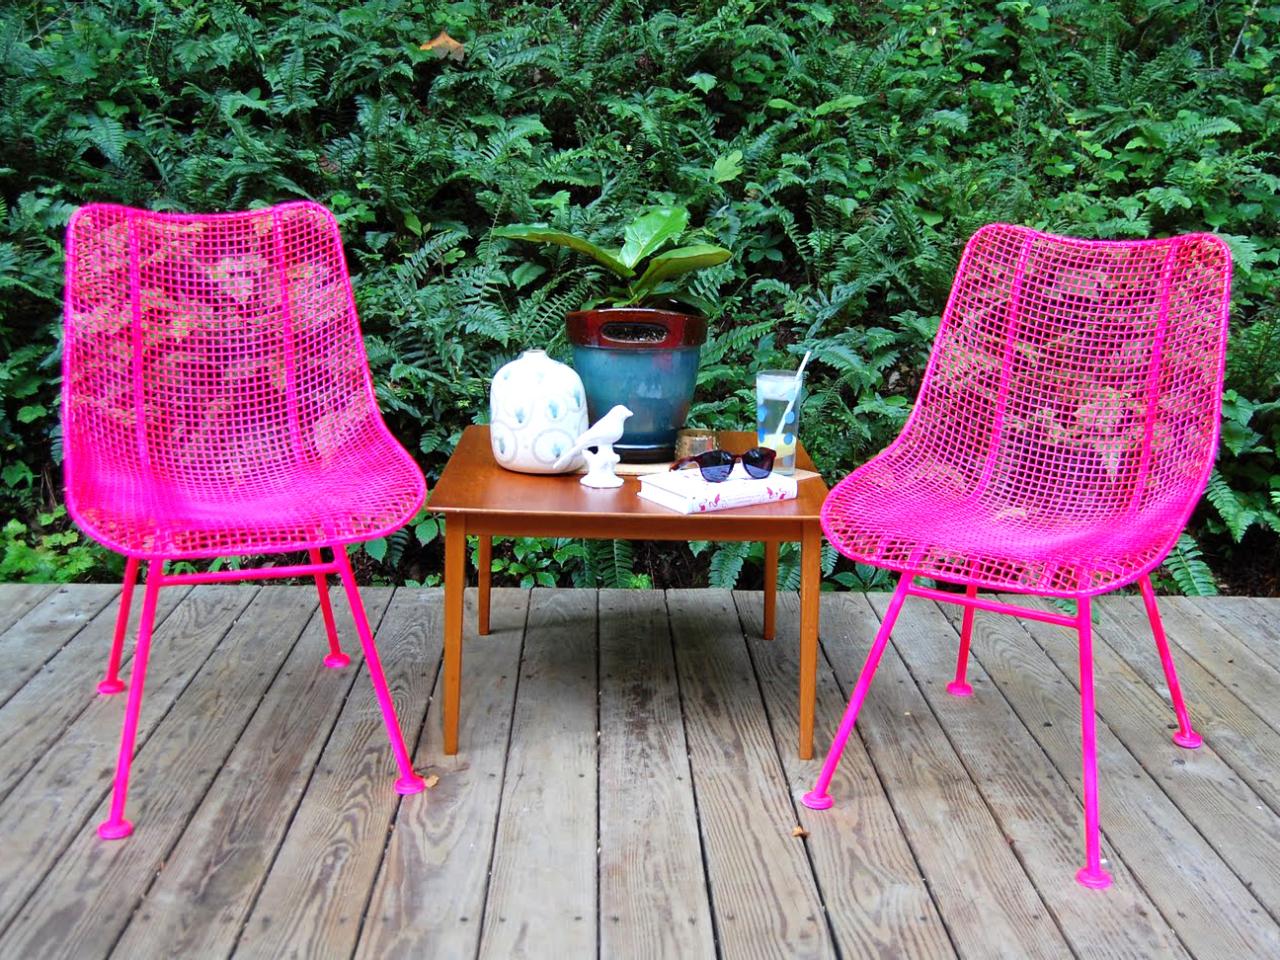 How To Paint Metal Chairs Tos Diy, Can You Spray Paint Outdoor Metal Chairs